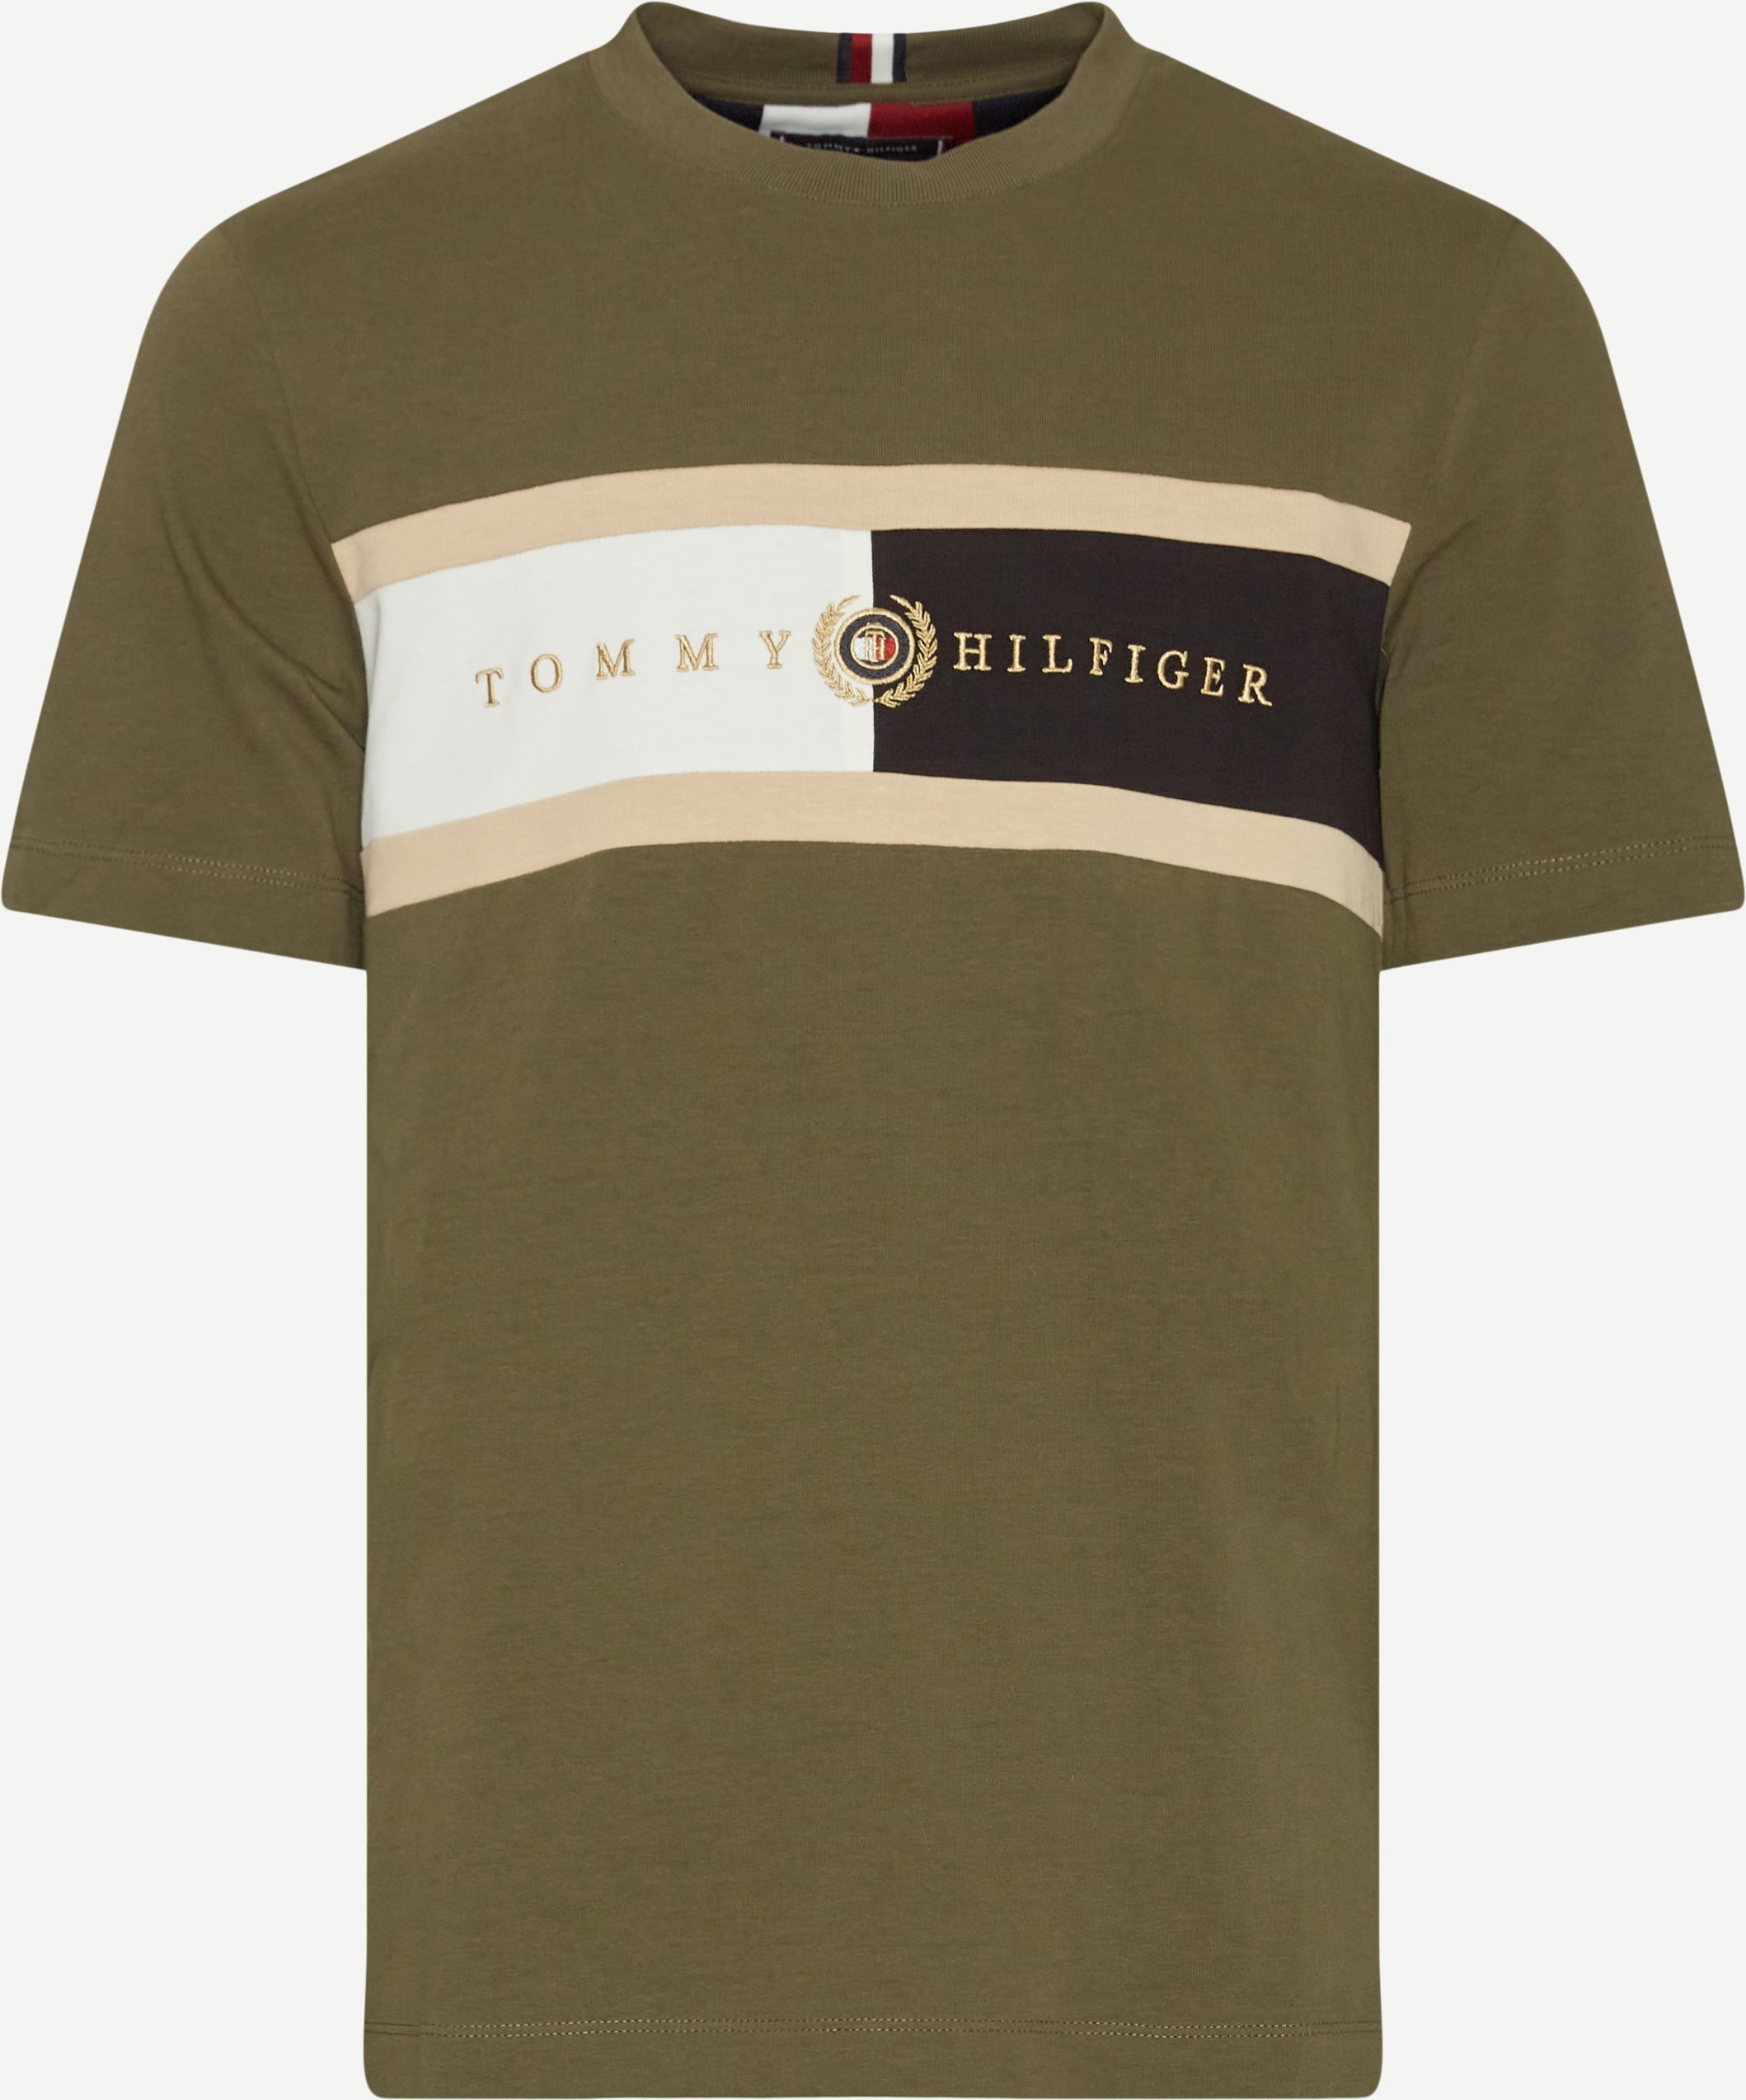 Icon Insert Tee - T-shirts - Regular fit - Army